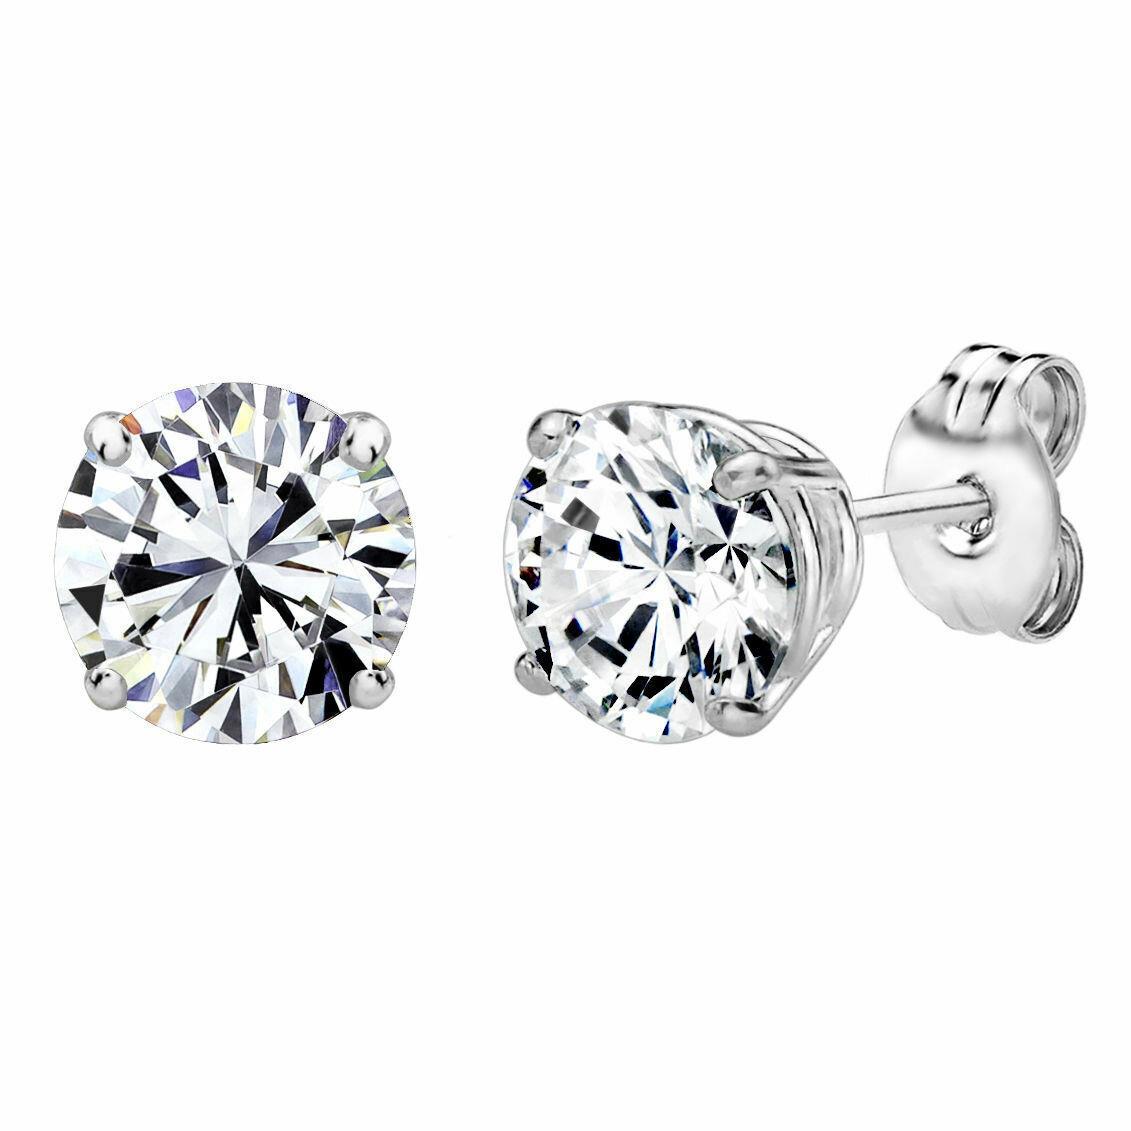 Sterling Silver 925 4.00 Carat Round Stud Earrings Made with Swarovski Zirconia